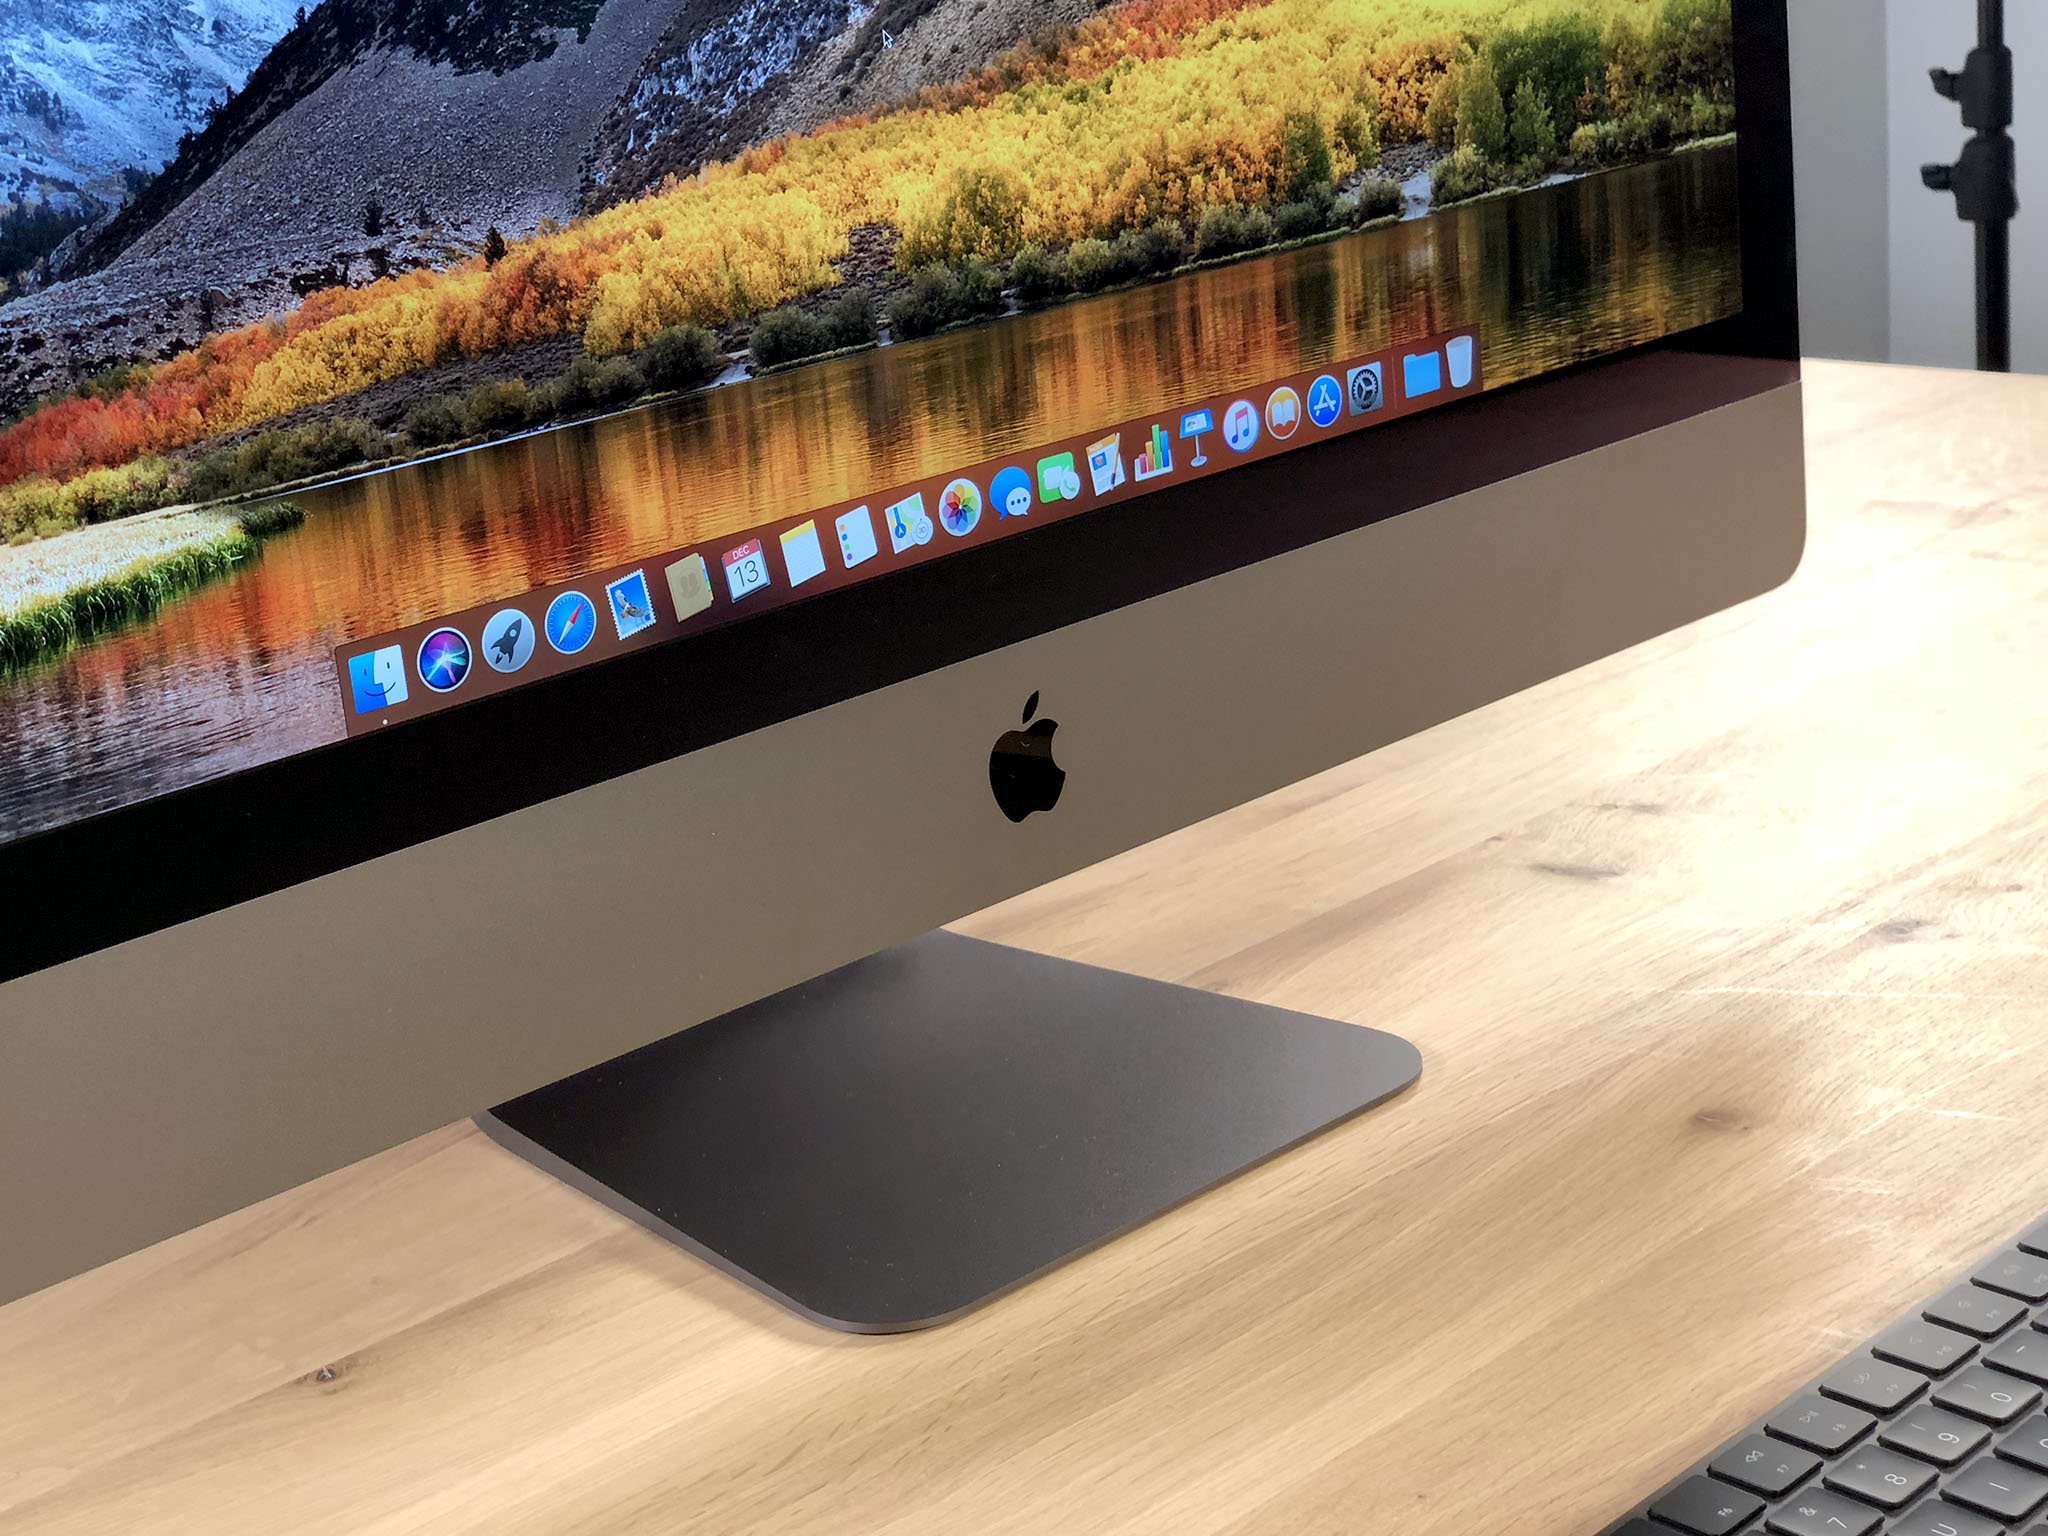 How to use Secure Boot to make sure your iMac Pro boots up a legitimate OS